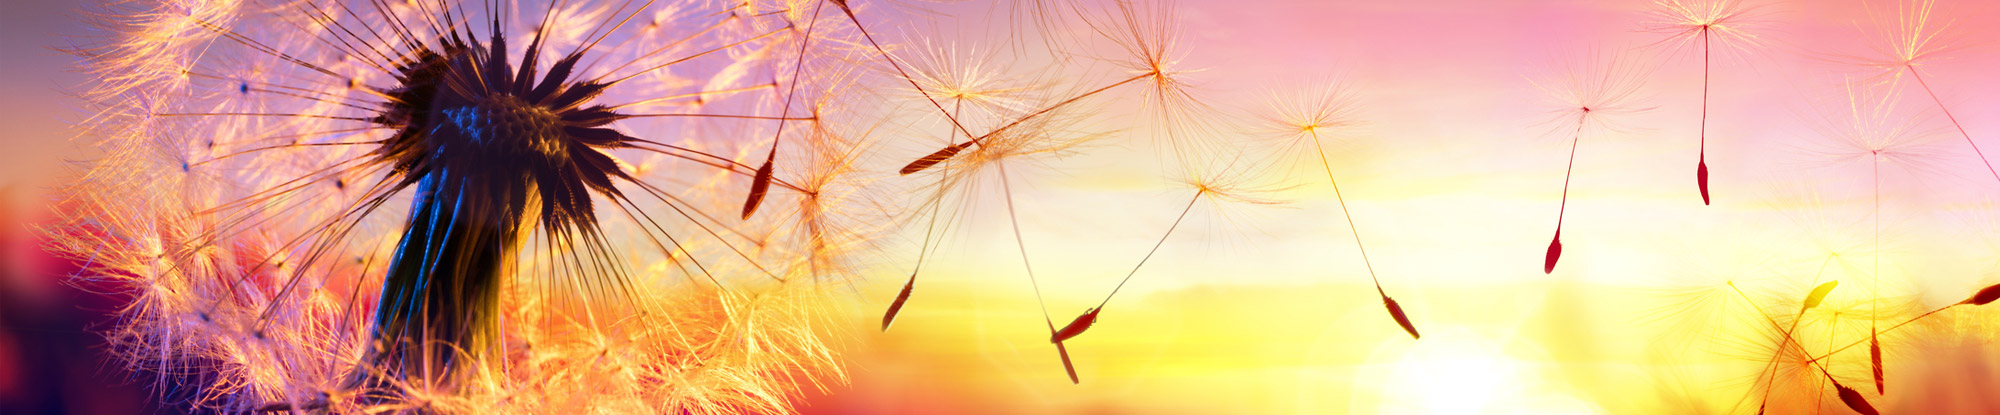 dandelion seeds being blown off the flower with the sun setting behind it